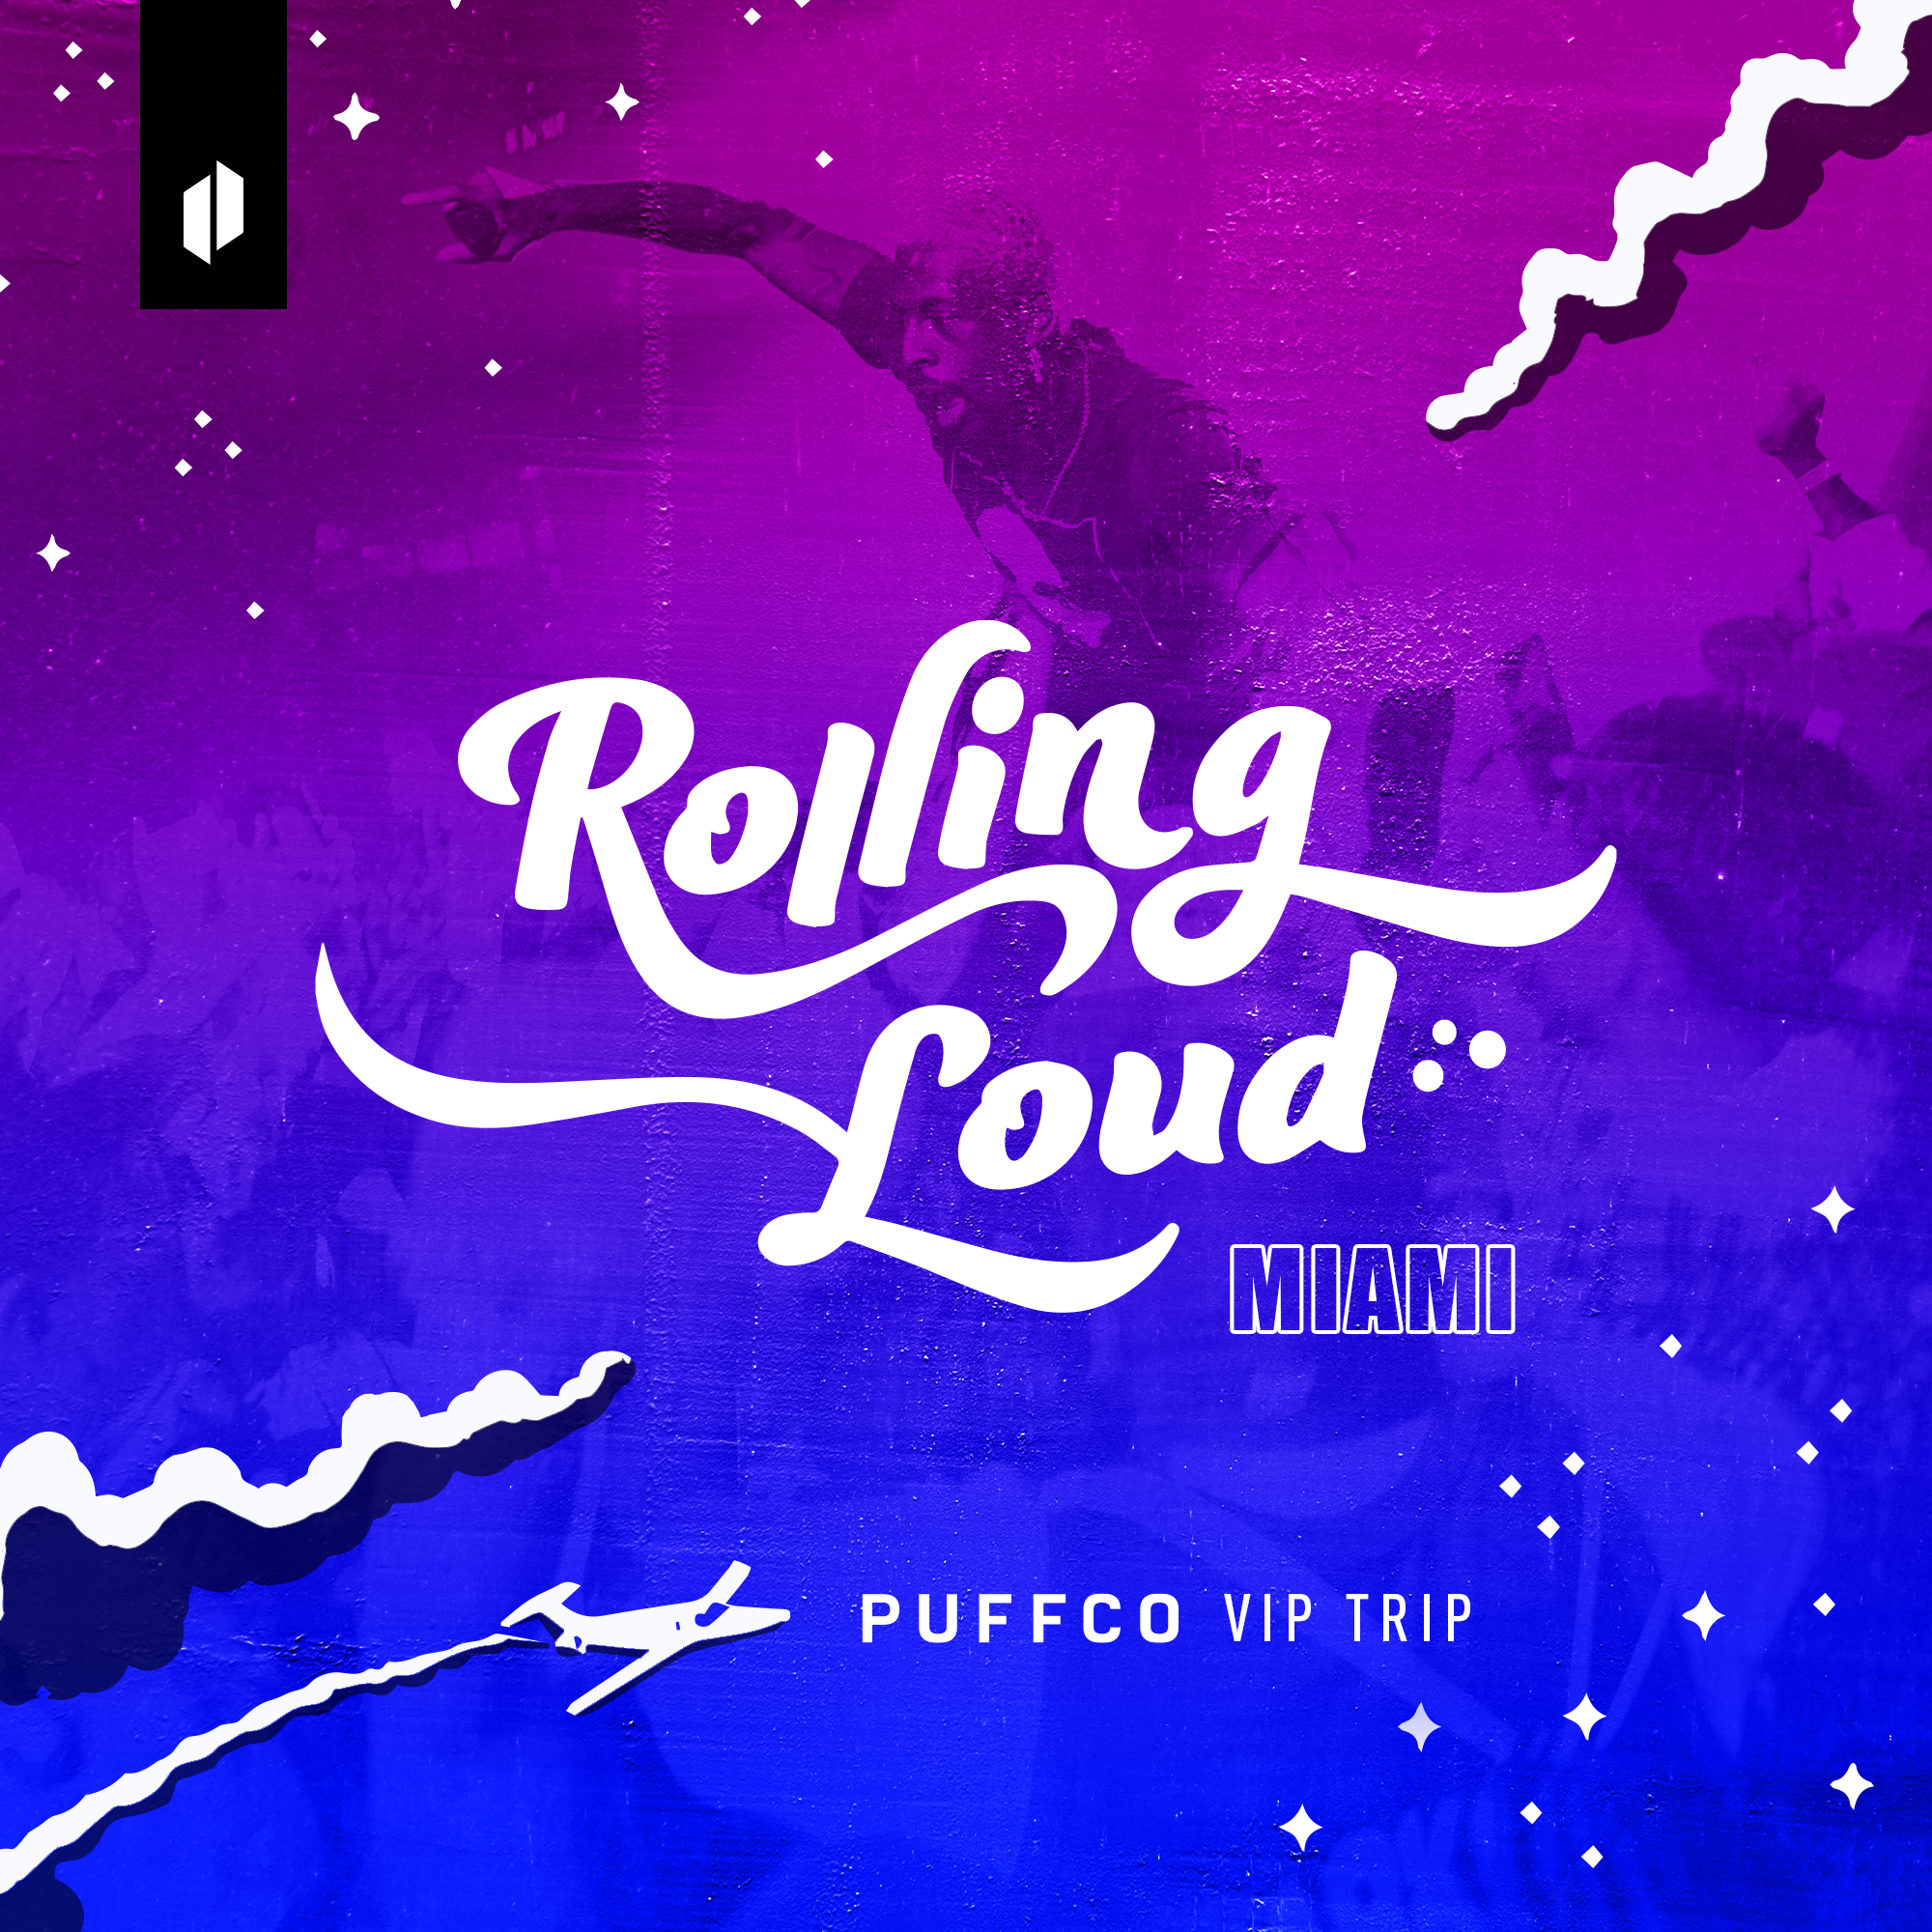 Graphic image announcing the chance to win a Puffco VIP trip to the Rolling Loud concert in Miami